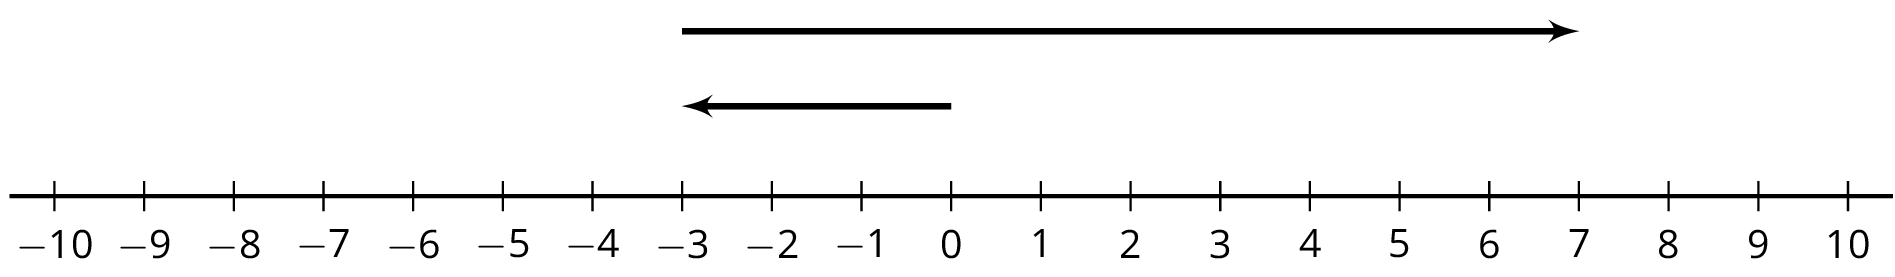 A number line with the numbers negative 10 through 10 indicated. An arrow starts at negative 3, points to the right, and ends at 7. A second arrow starts at 0, points to the left, and ends at negative 3.